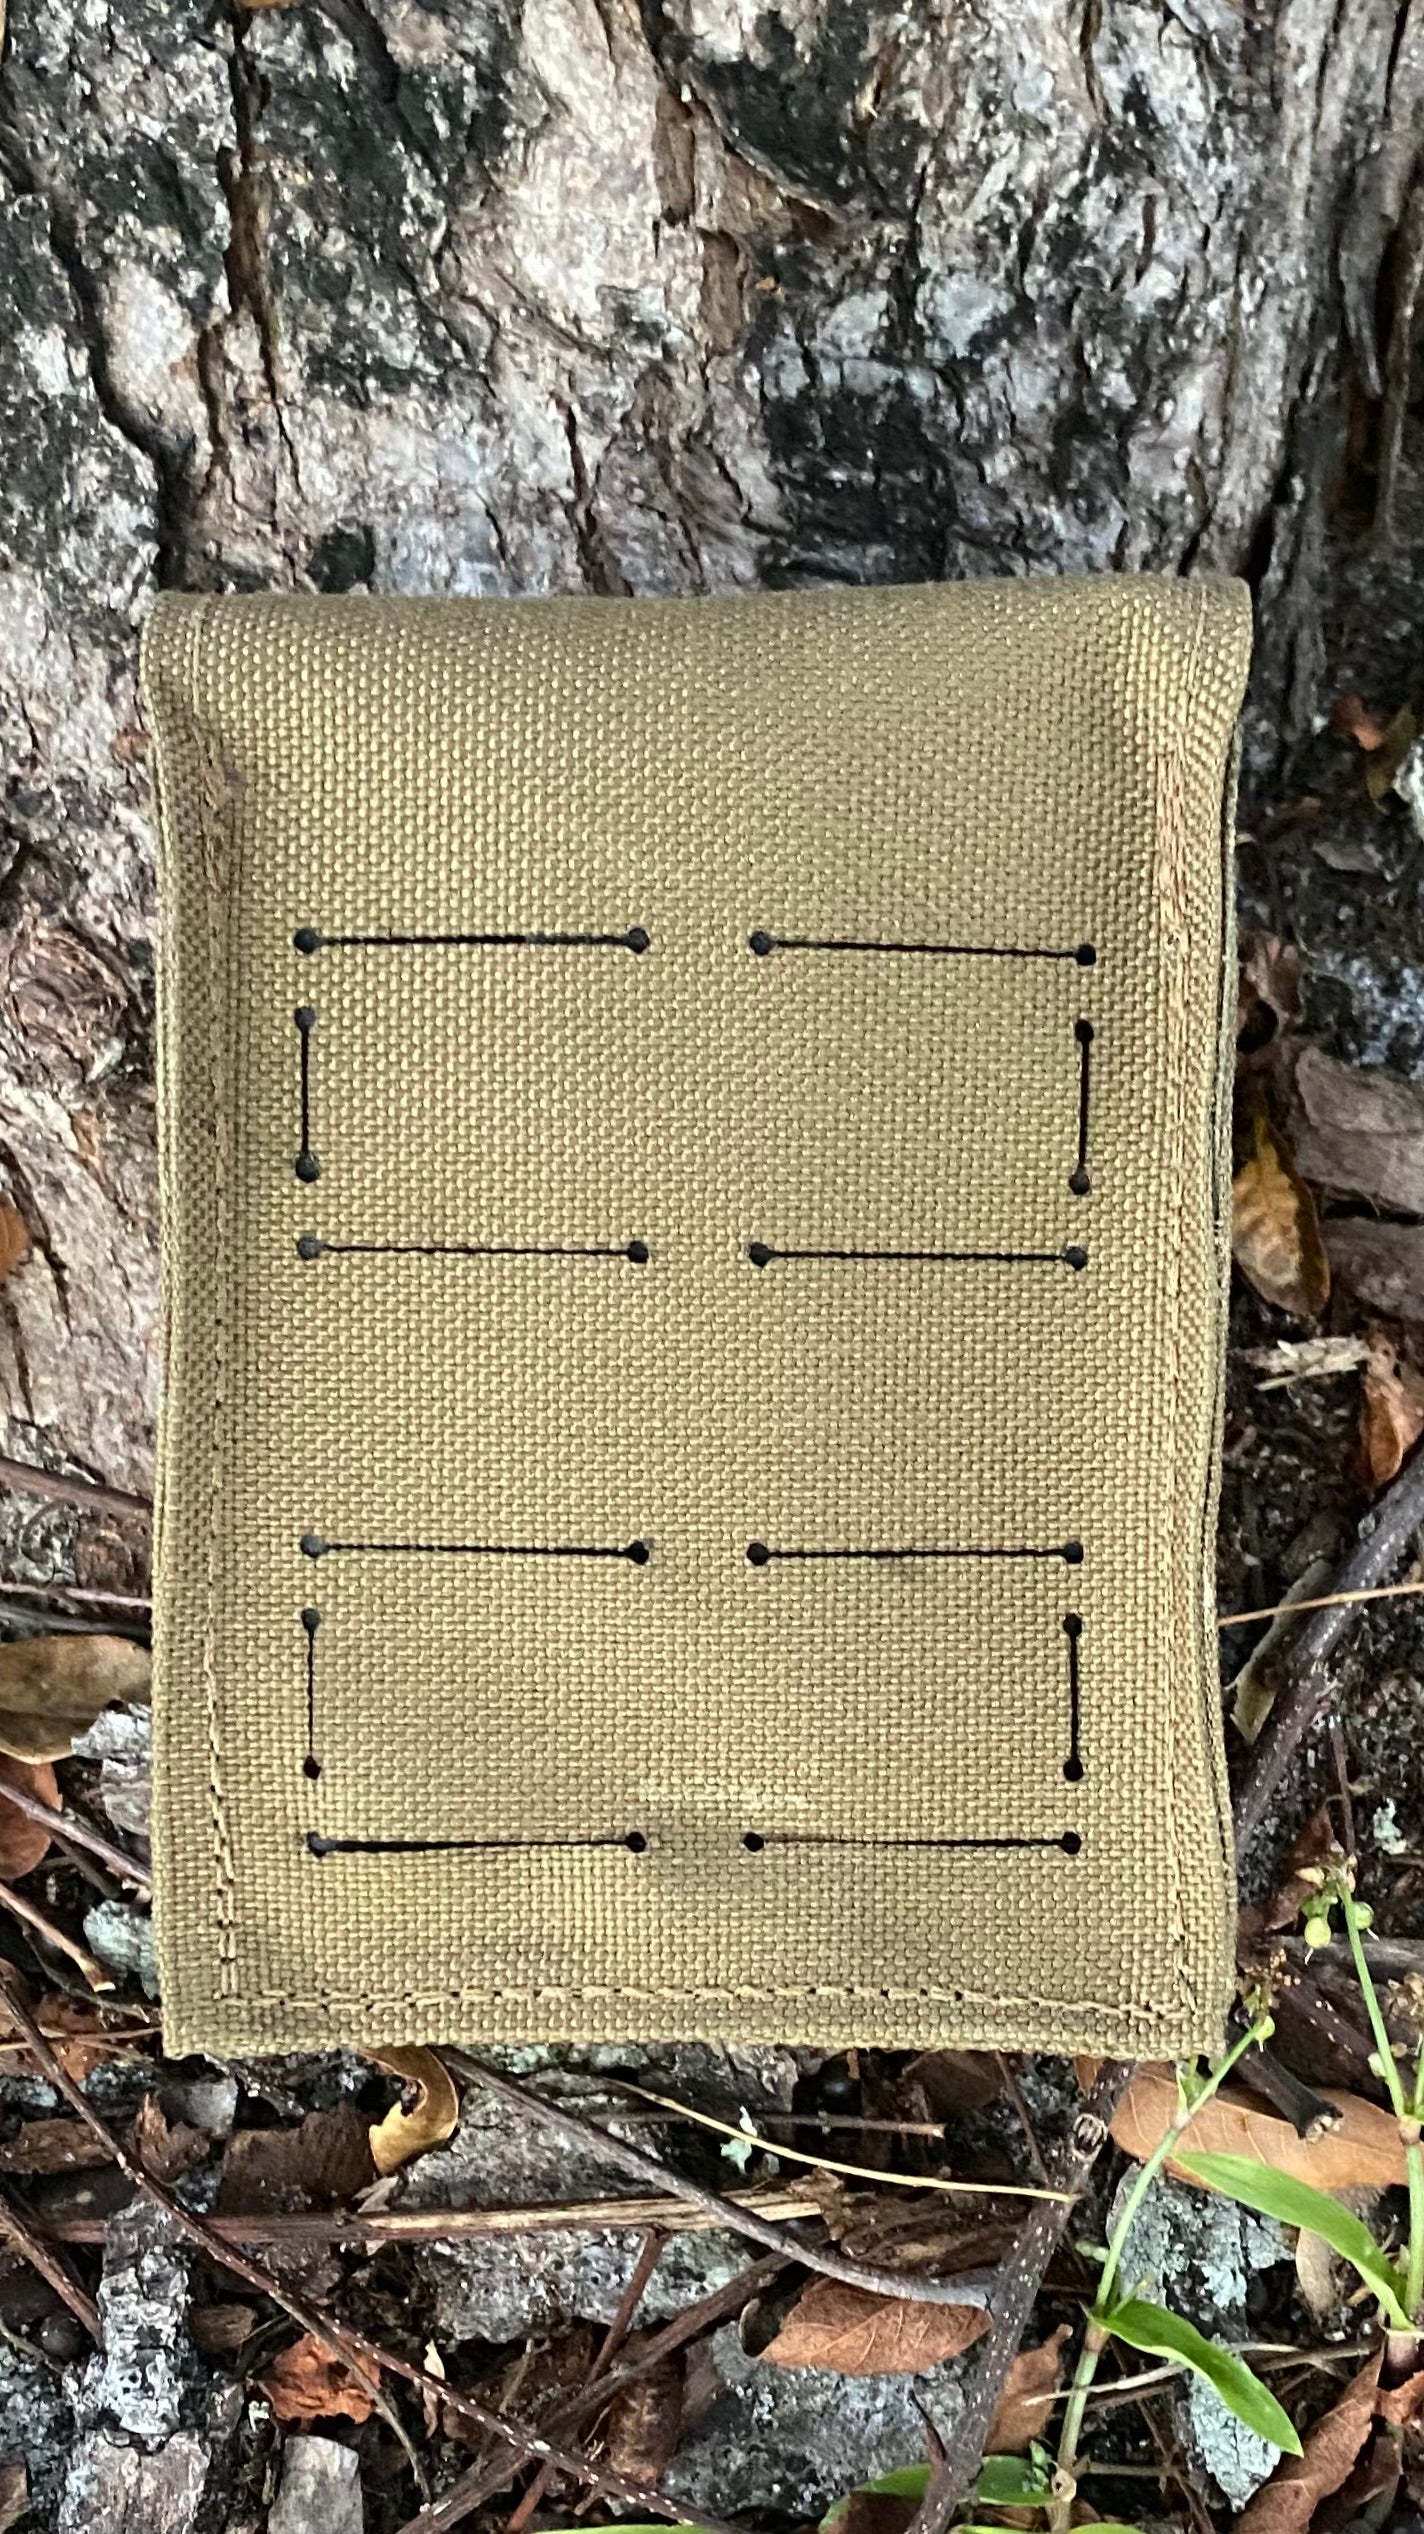 Compass Pouch - Shipping included. (U.S.A. only)